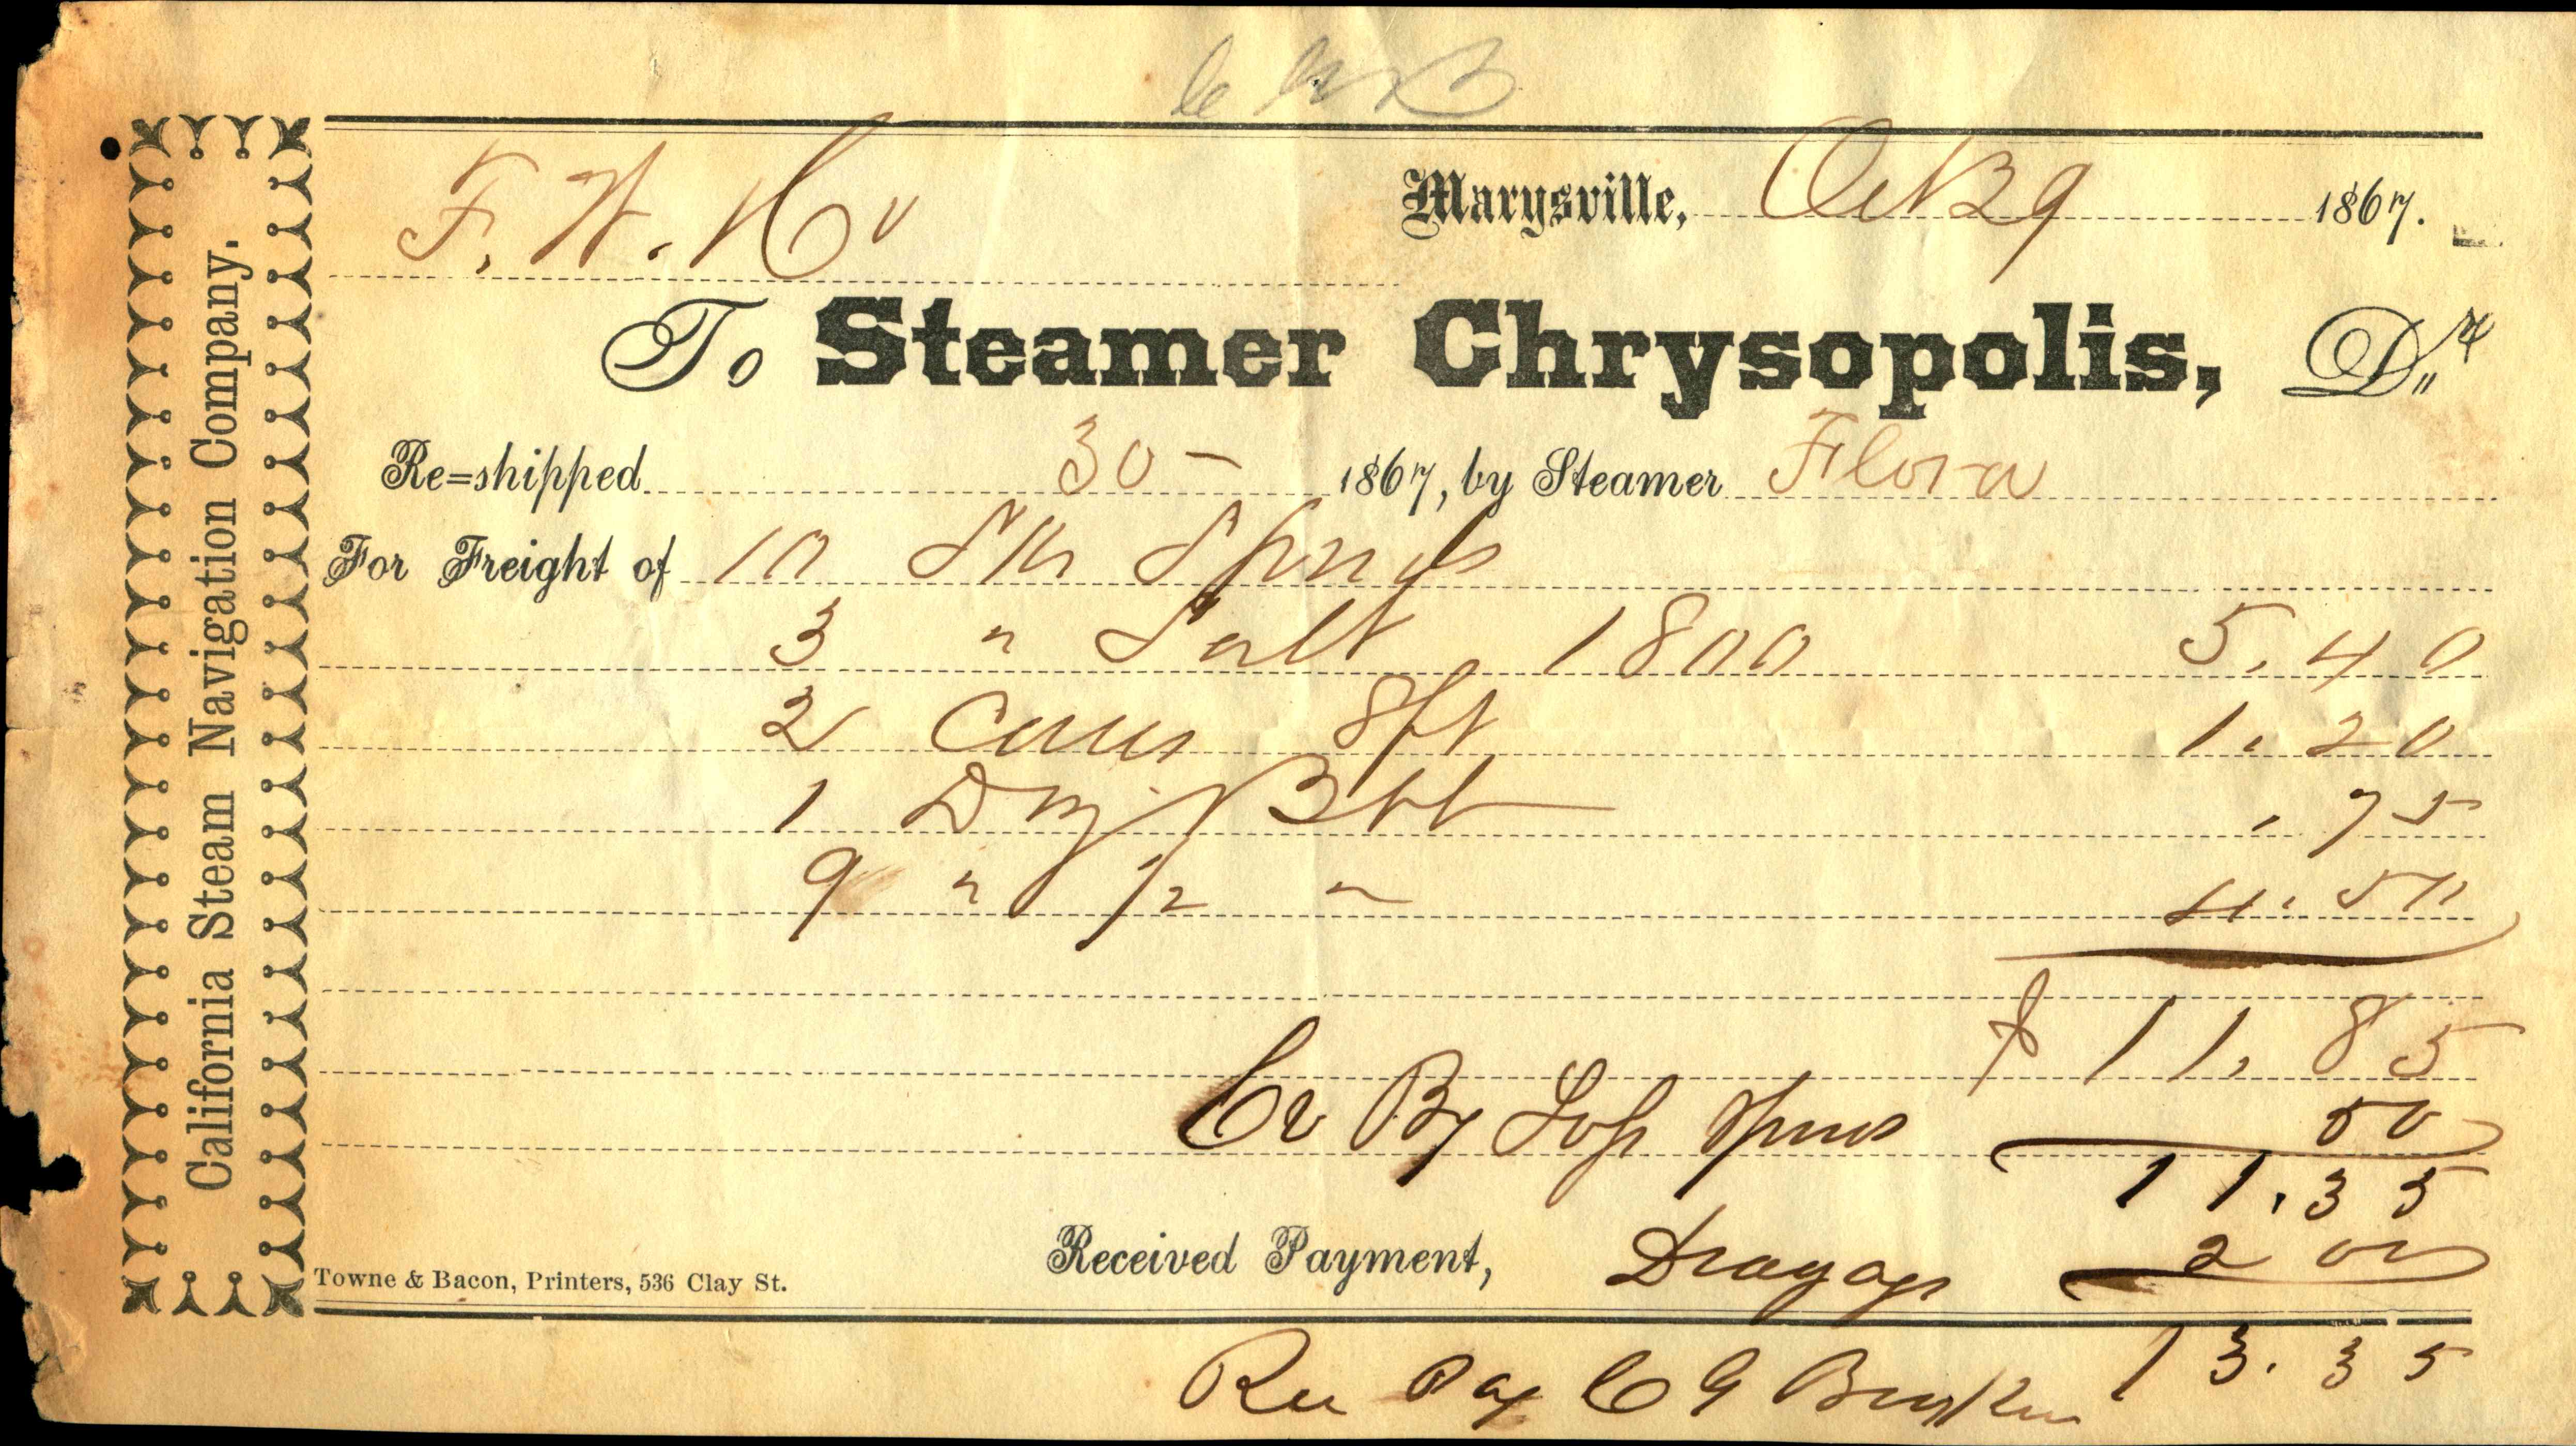 A California Steam Navigation Company on the left side of the receipt